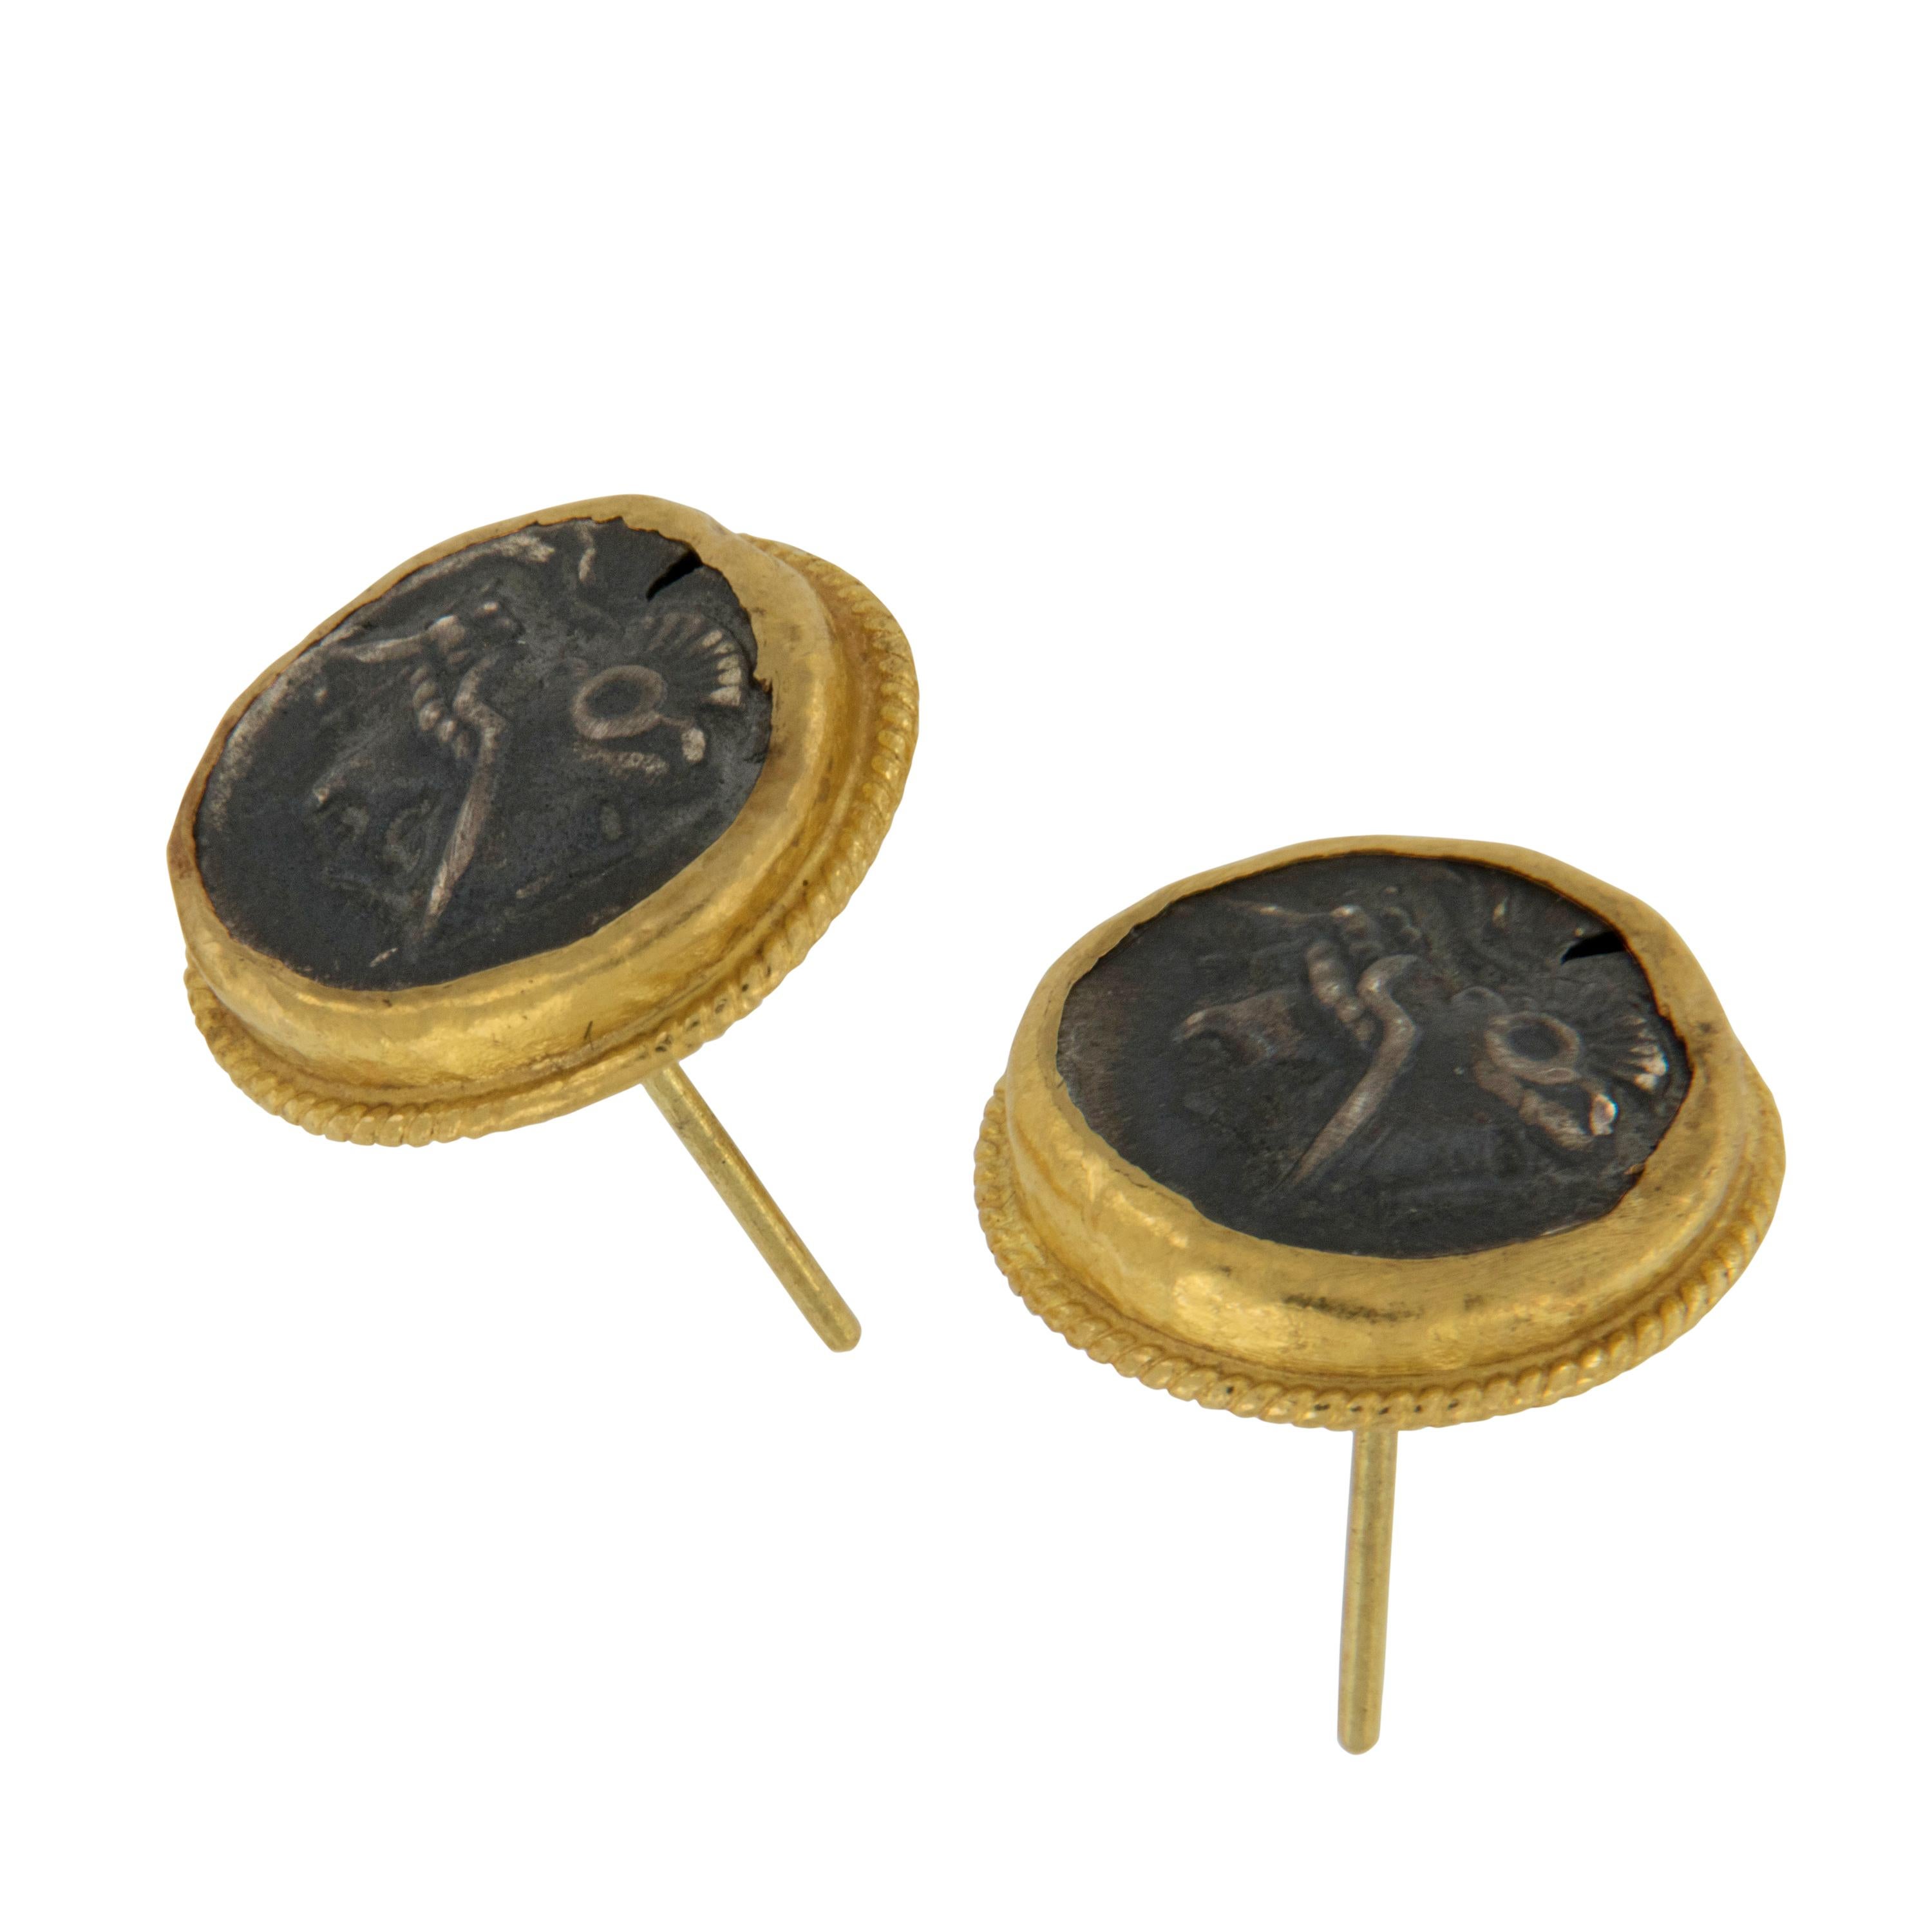 Cherished for it's warm color, these pure 24 karat yellow gold earrings encompass sterling silver replica Roman coins for a dynamic combination! Made with posts & 18 karat gold friction backs for security of wear these earrings are timeless.